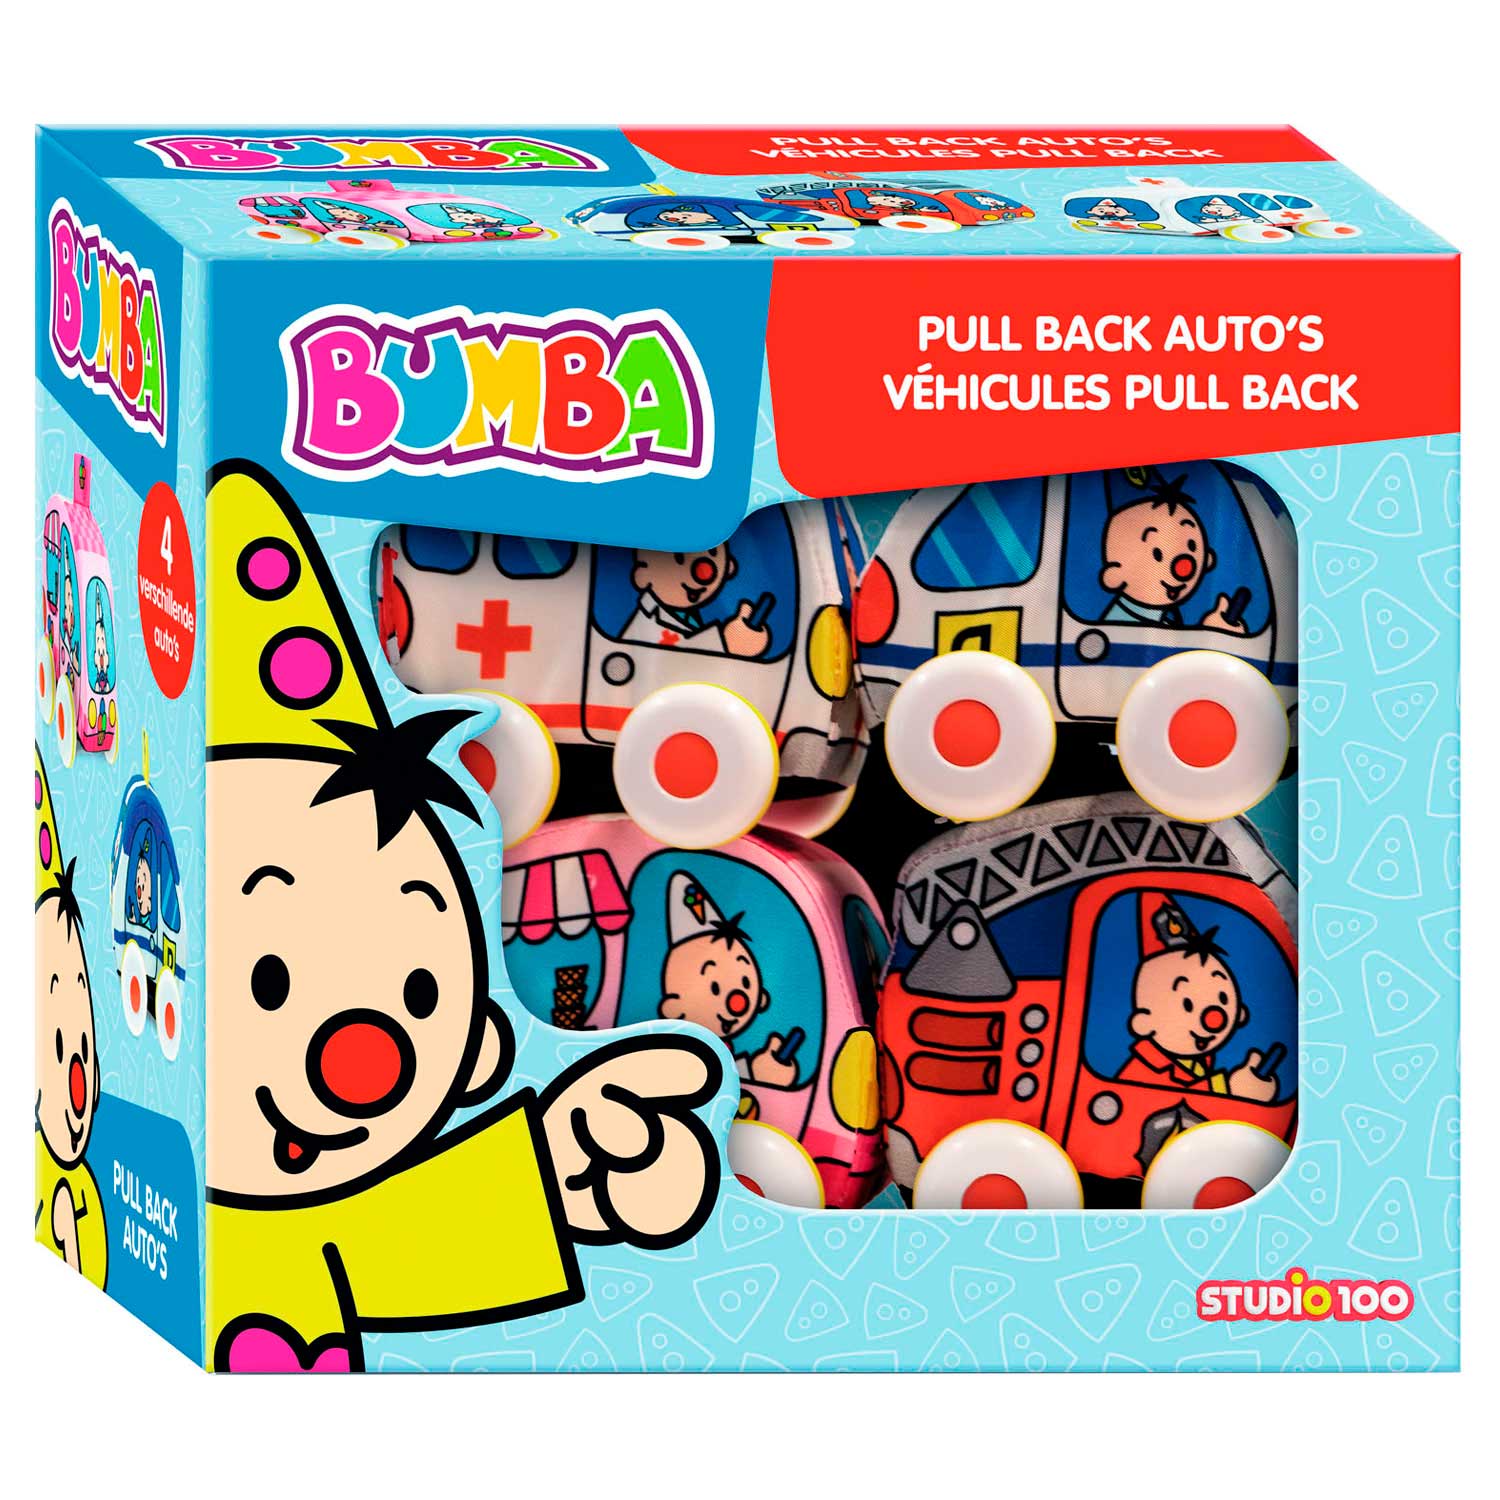 Bumba Pull back Auto's, 4st.